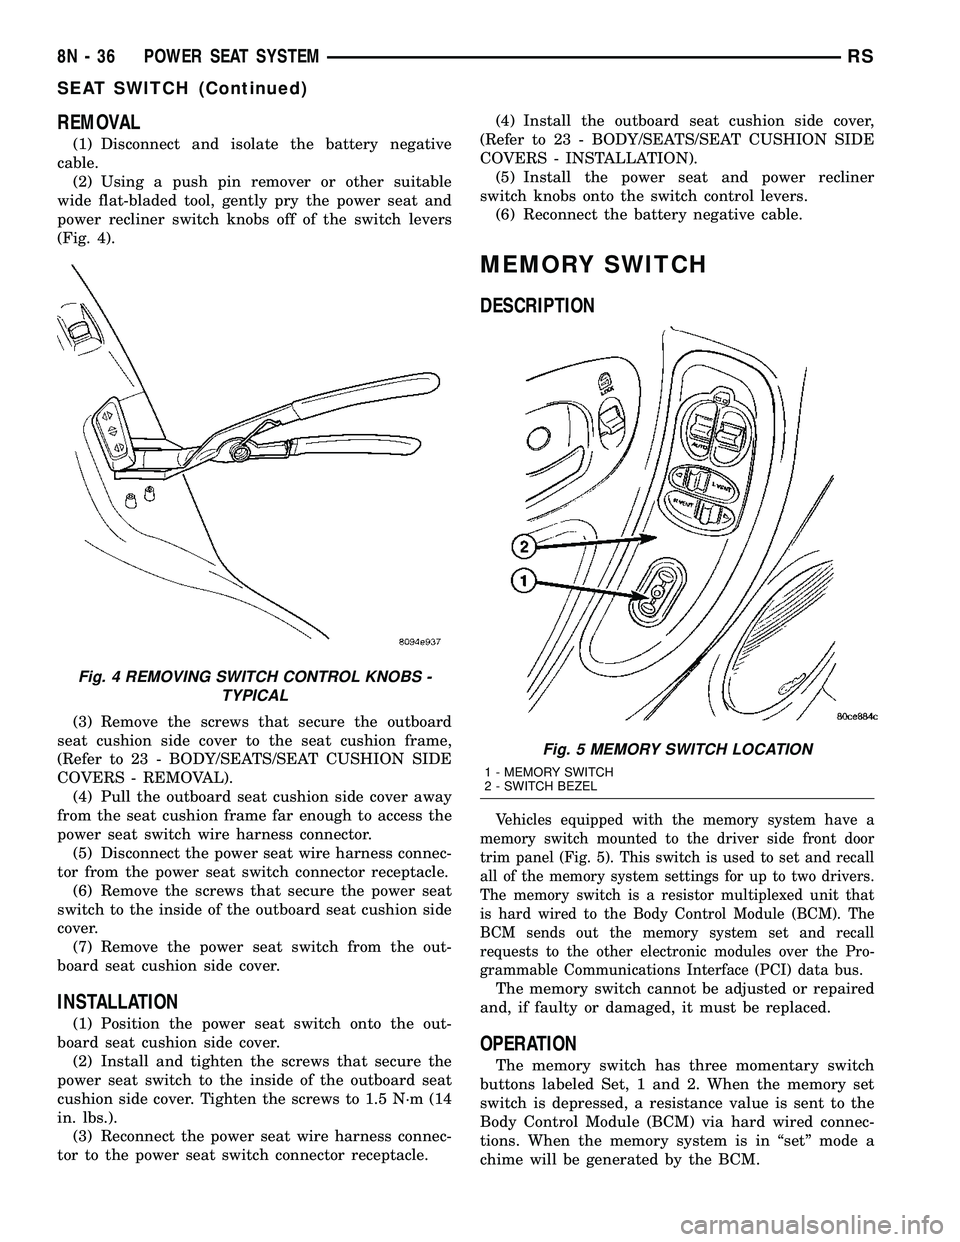 CHRYSLER VOYAGER 2005  Service Manual REMOVAL
(1) Disconnect and isolate the battery negative
cable.
(2) Using a push pin remover or other suitable
wide flat-bladed tool, gently pry the power seat and
power recliner switch knobs off of th